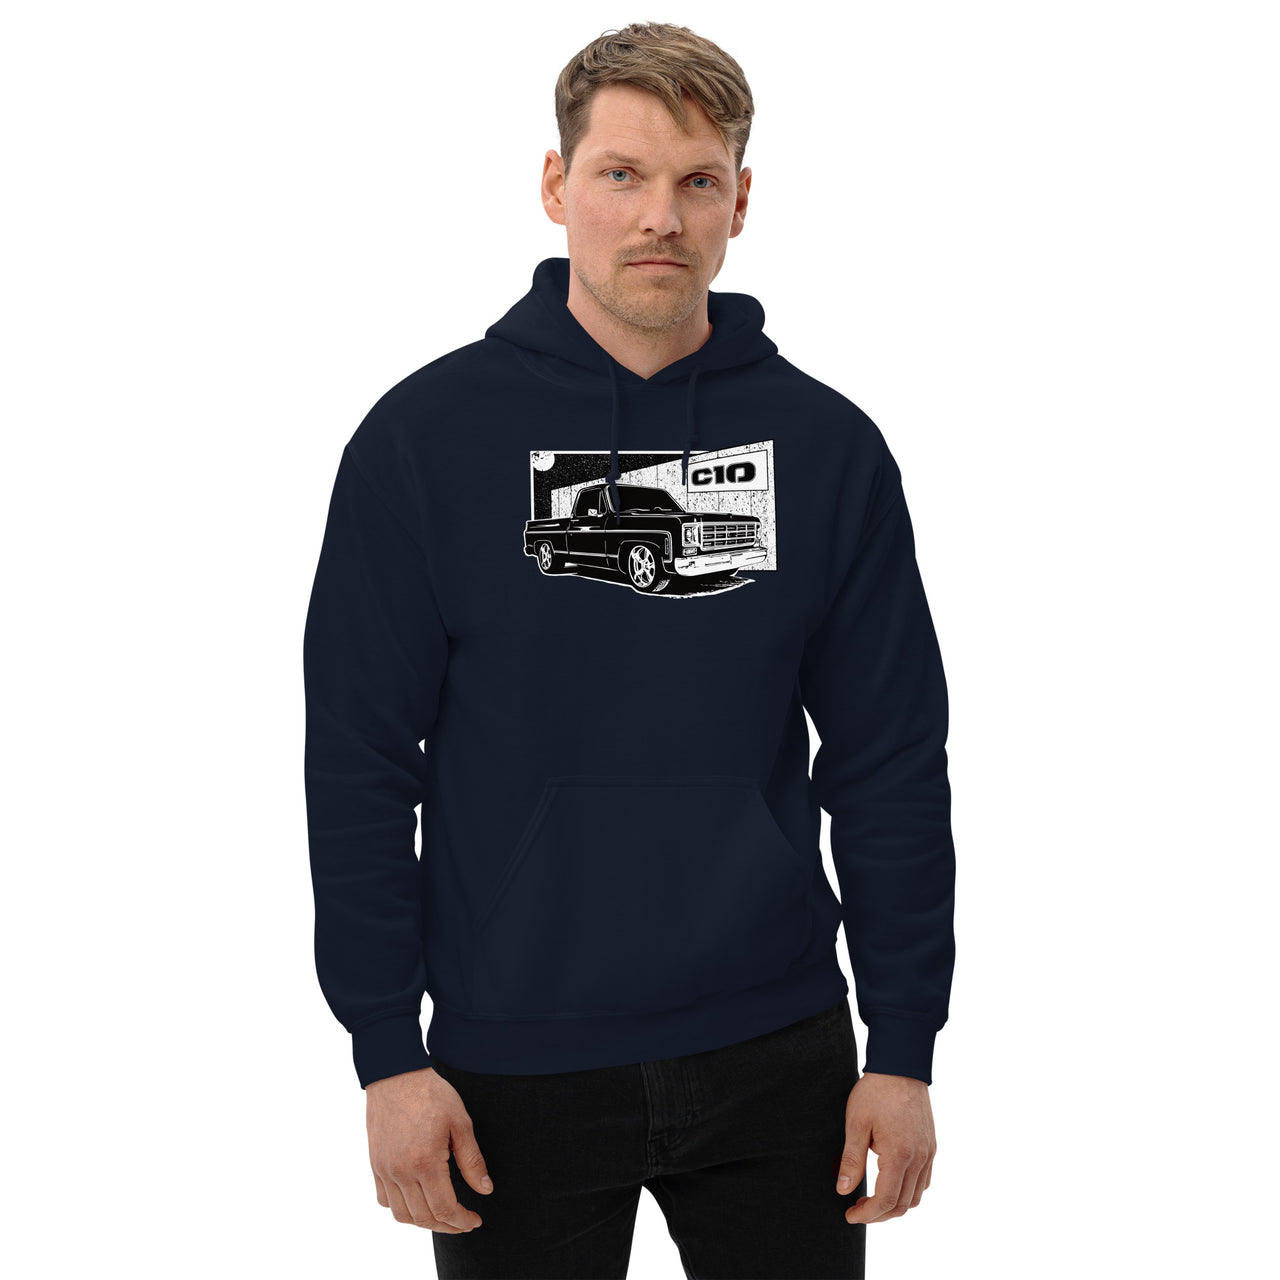 Square Body C10 Hoodie modeled in navy